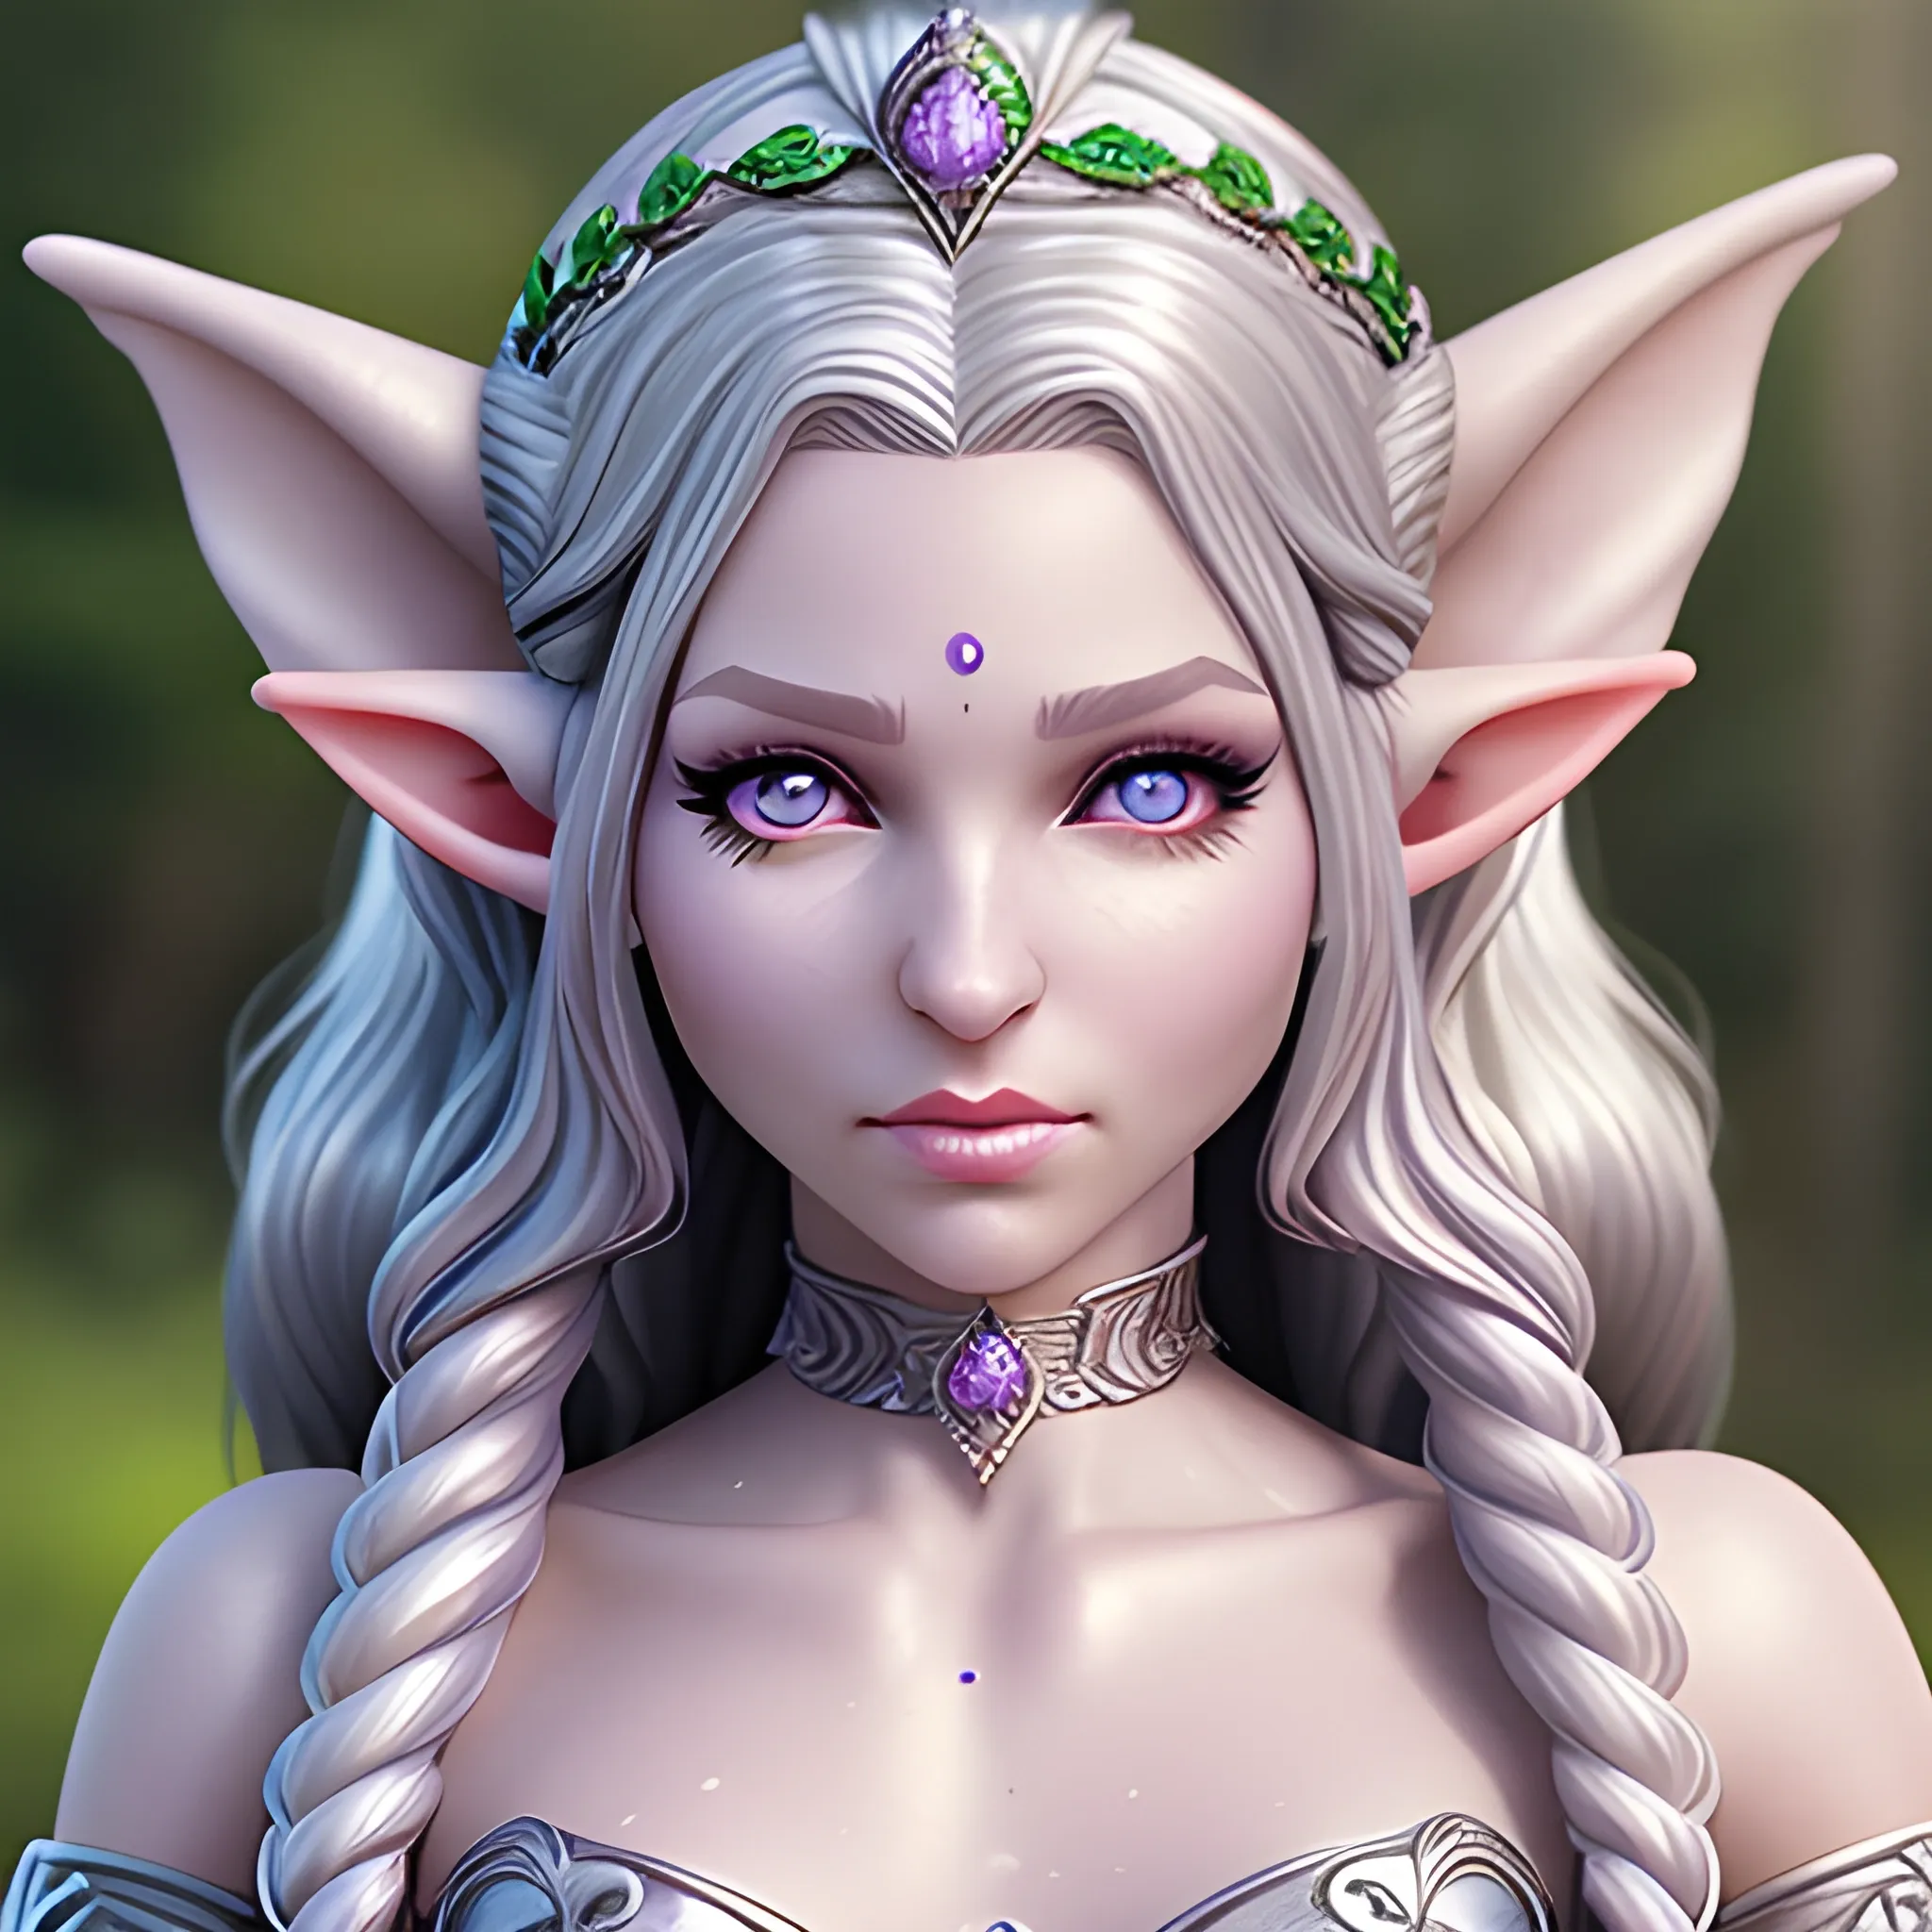 realistic female elf with long curling silver hair and purple eyes. Jeweled ears and body. Dewy skin, soft features queenly